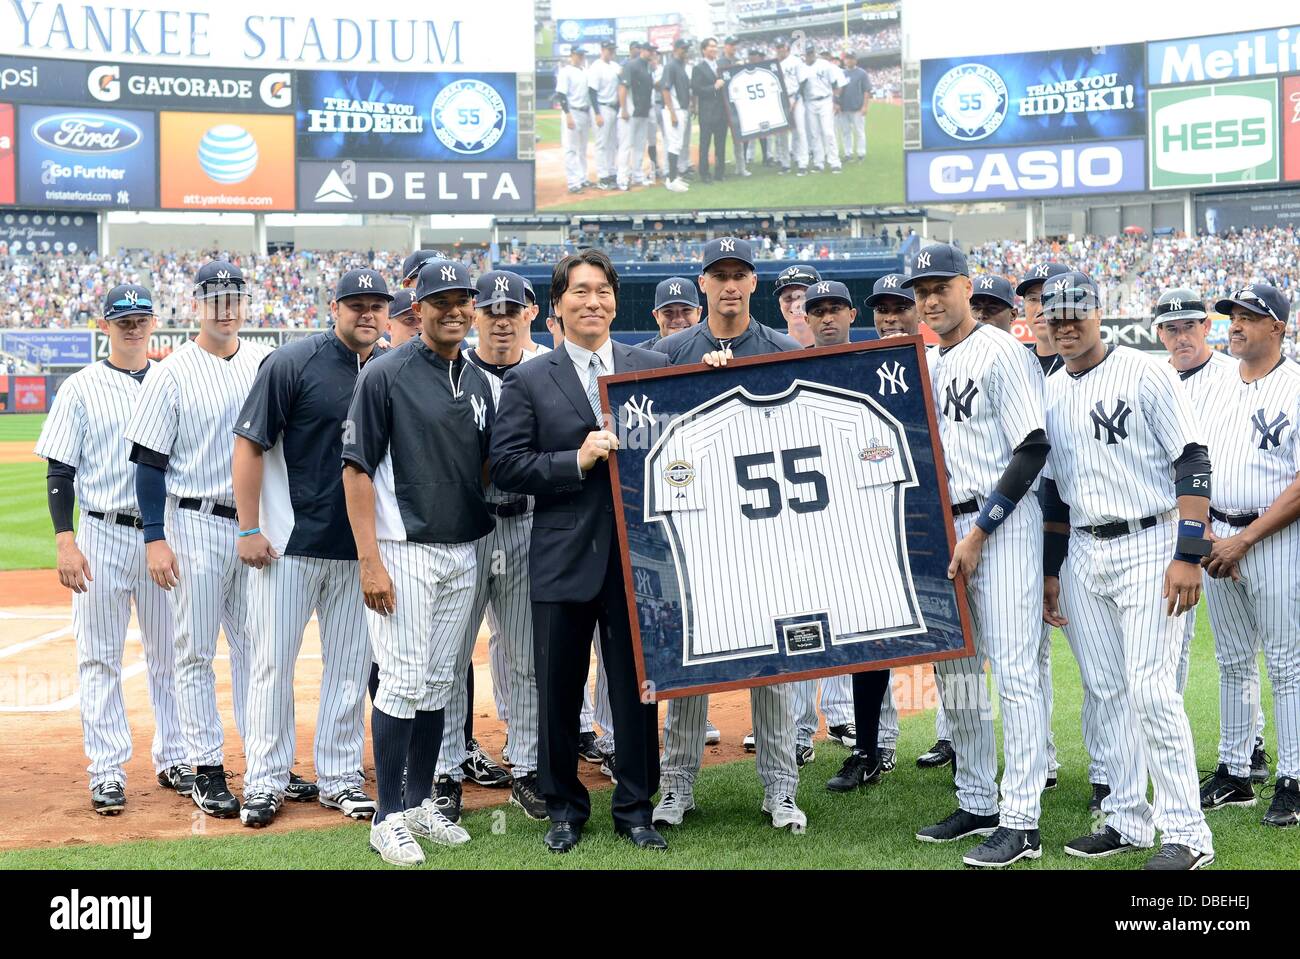 The Bronx, New York, USA. 28th , 2013. Hideki Matsui MLB : Hideki Matsui  poses with a framed number 55 jersey and New York Yankees players after  receiving it from Derek Jeter